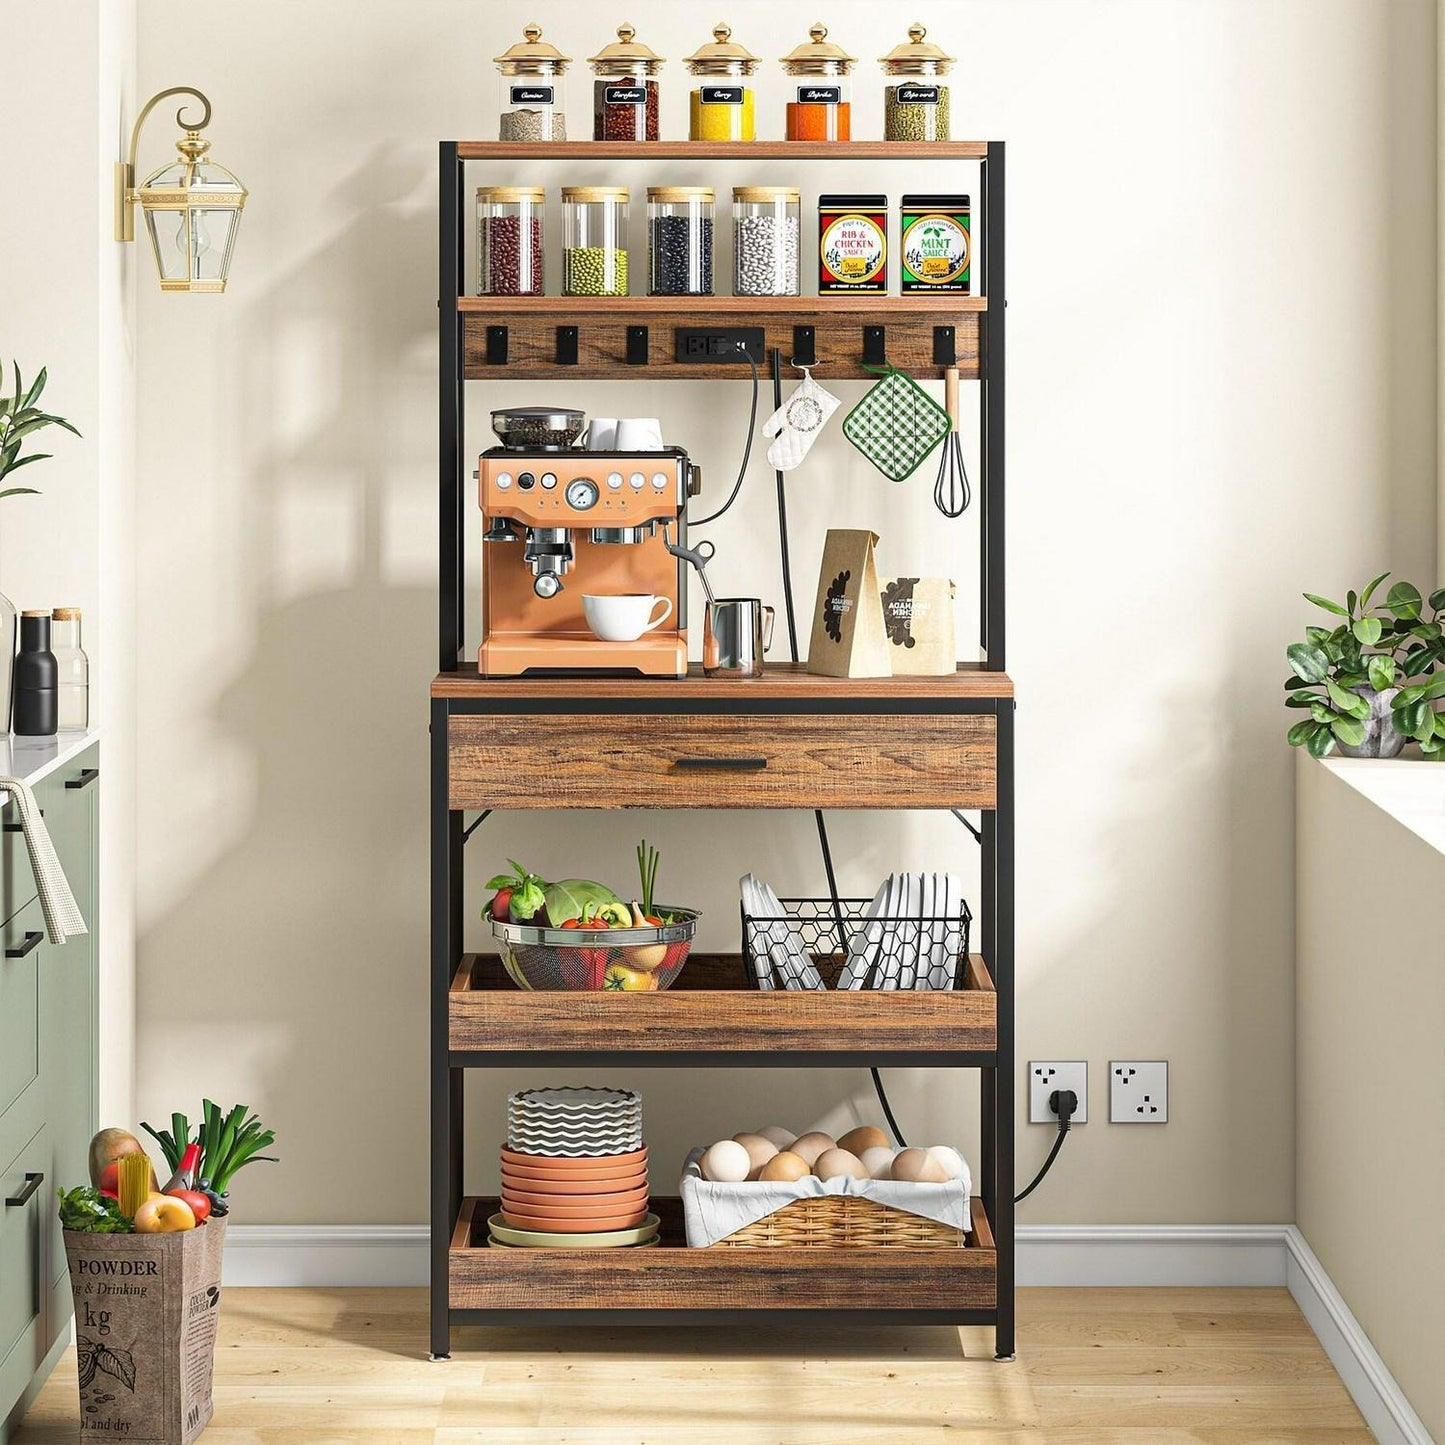 5.5ft 2-Tier Kitchen Baker's Rack w/ Outlets, Rustic Brown Fin - Microwave Stand